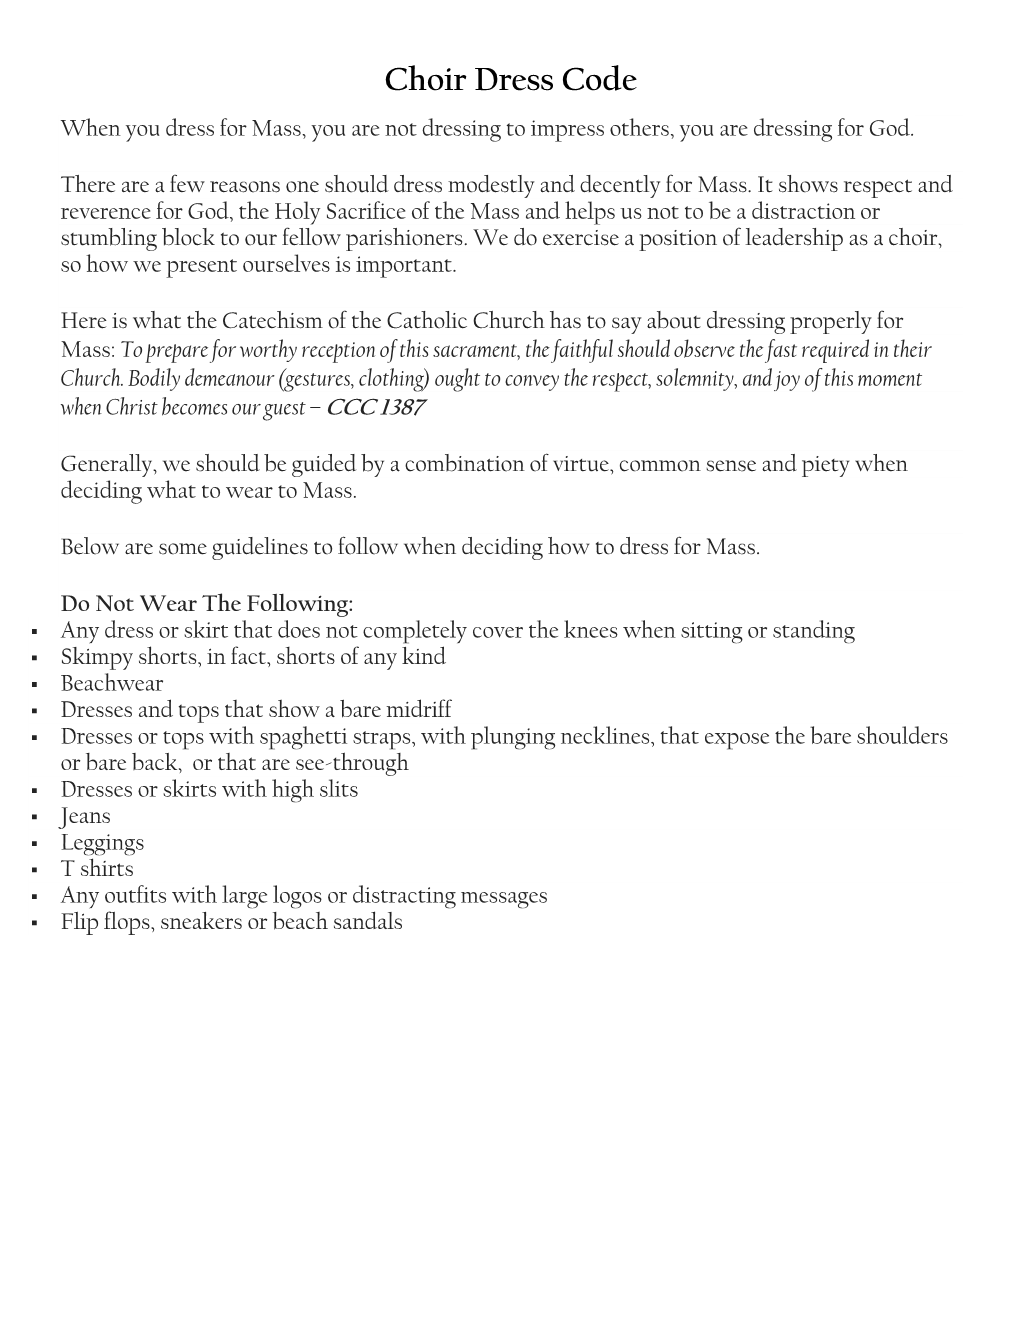 Choir Dress Code When You Dress for Mass, You Are Not Dressing to Impress Others, You Are Dressing for God